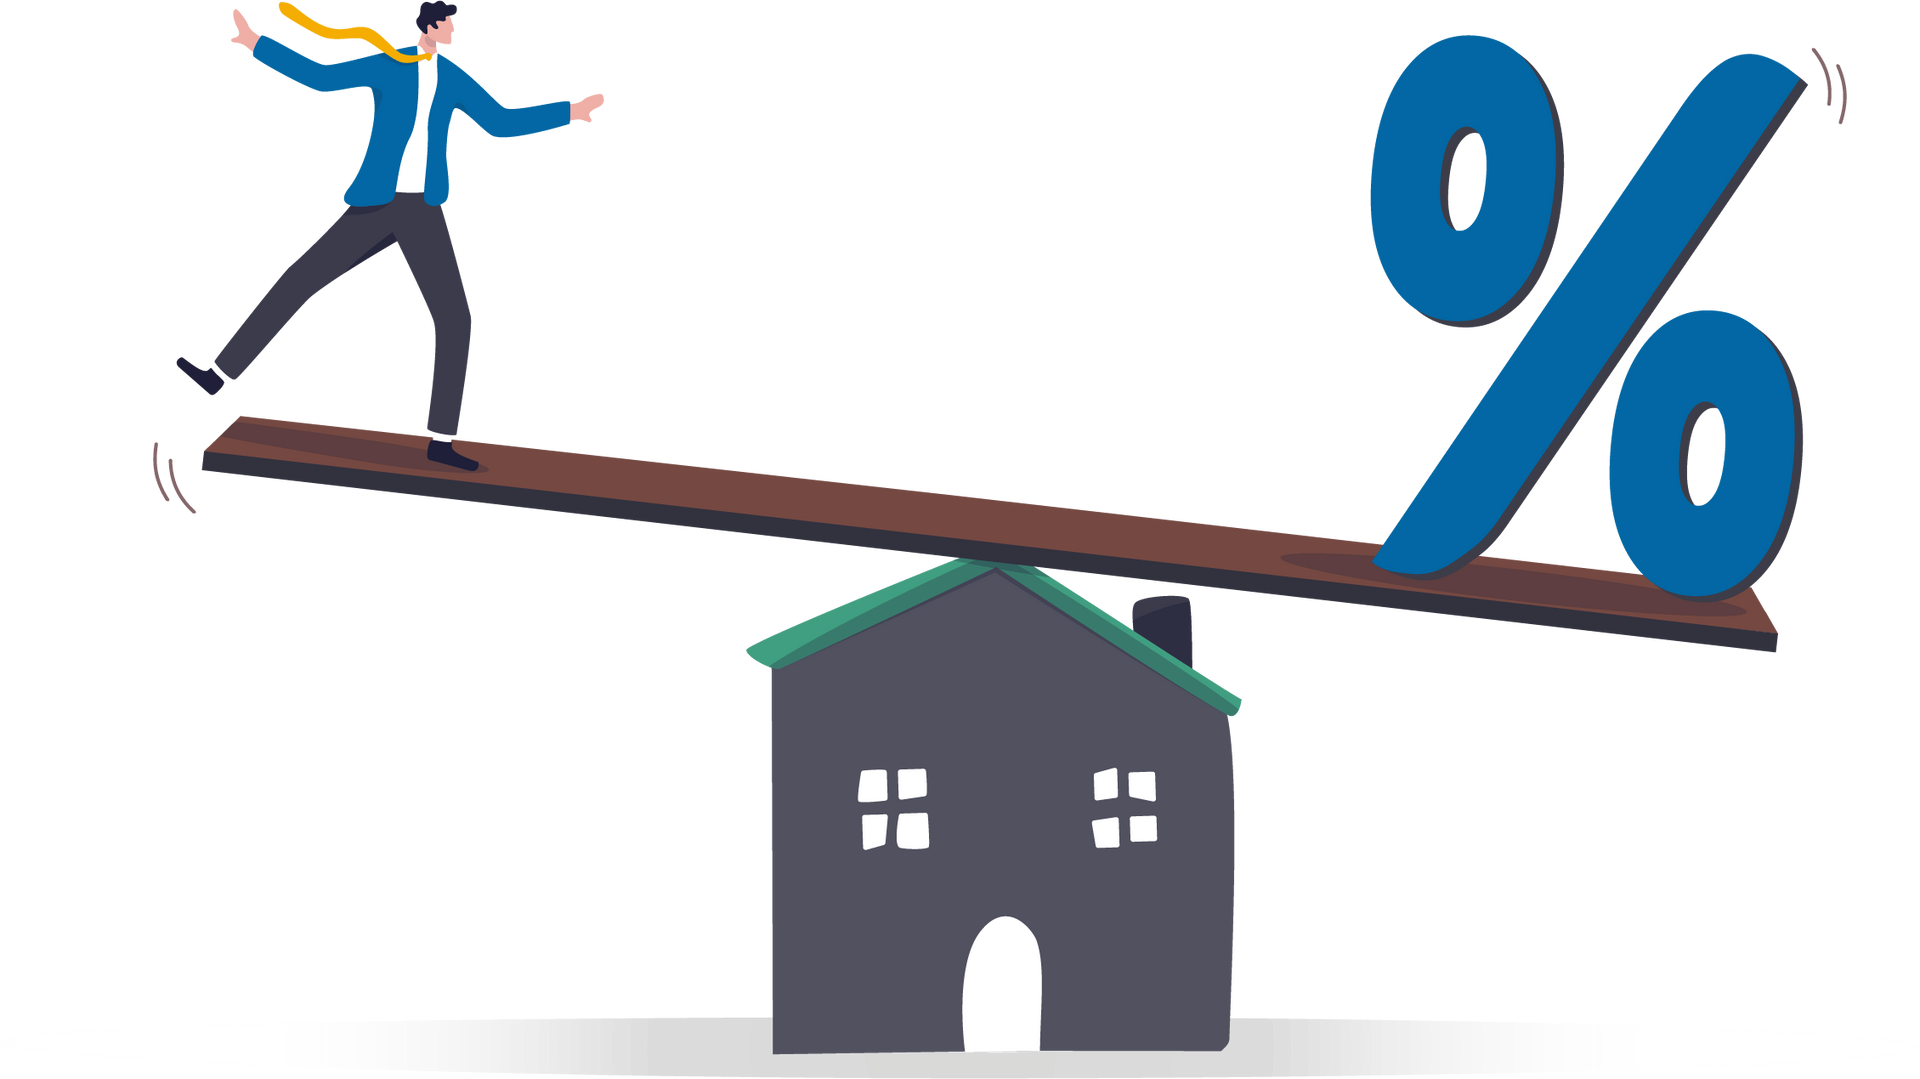 A man is standing on a seesaw with a house and a percent sign.